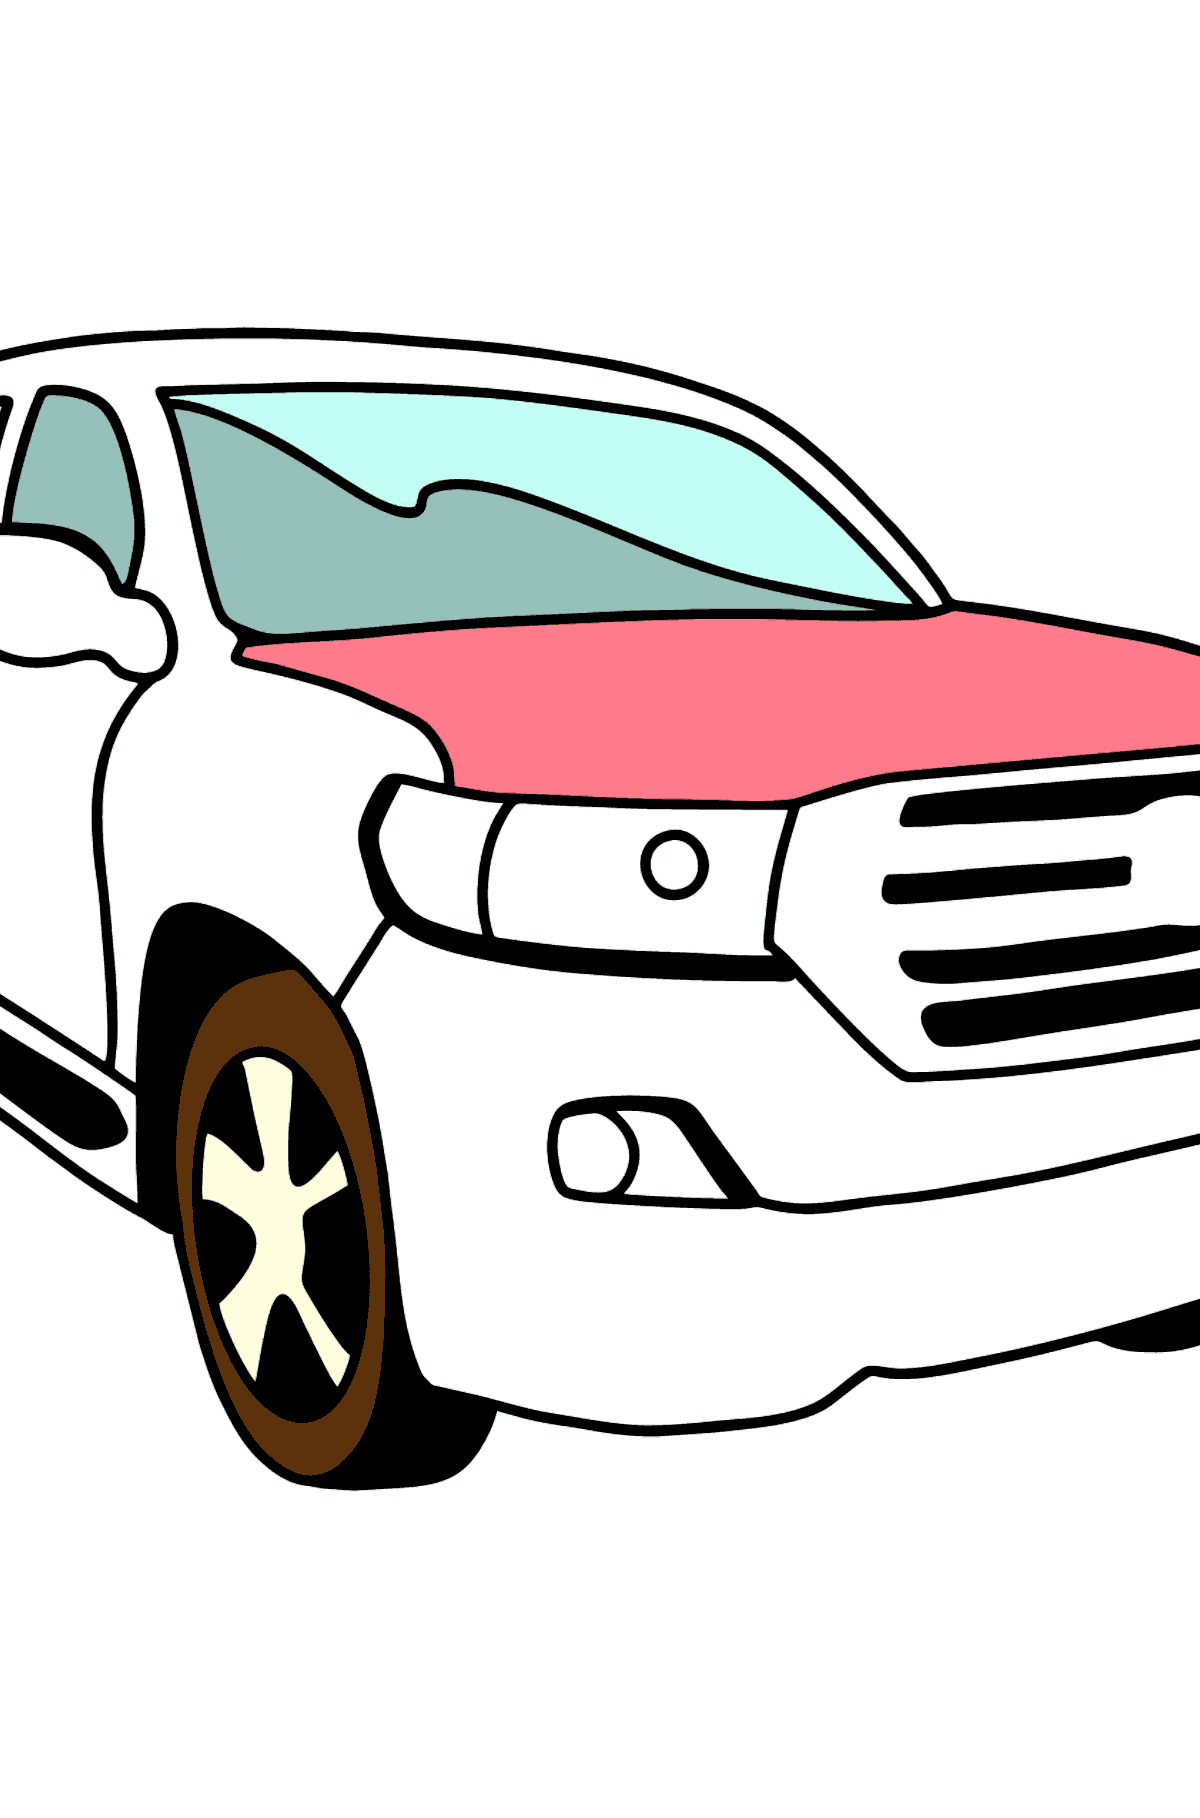 Toyota Land Cruiser Car coloring page - Coloring Pages for Kids